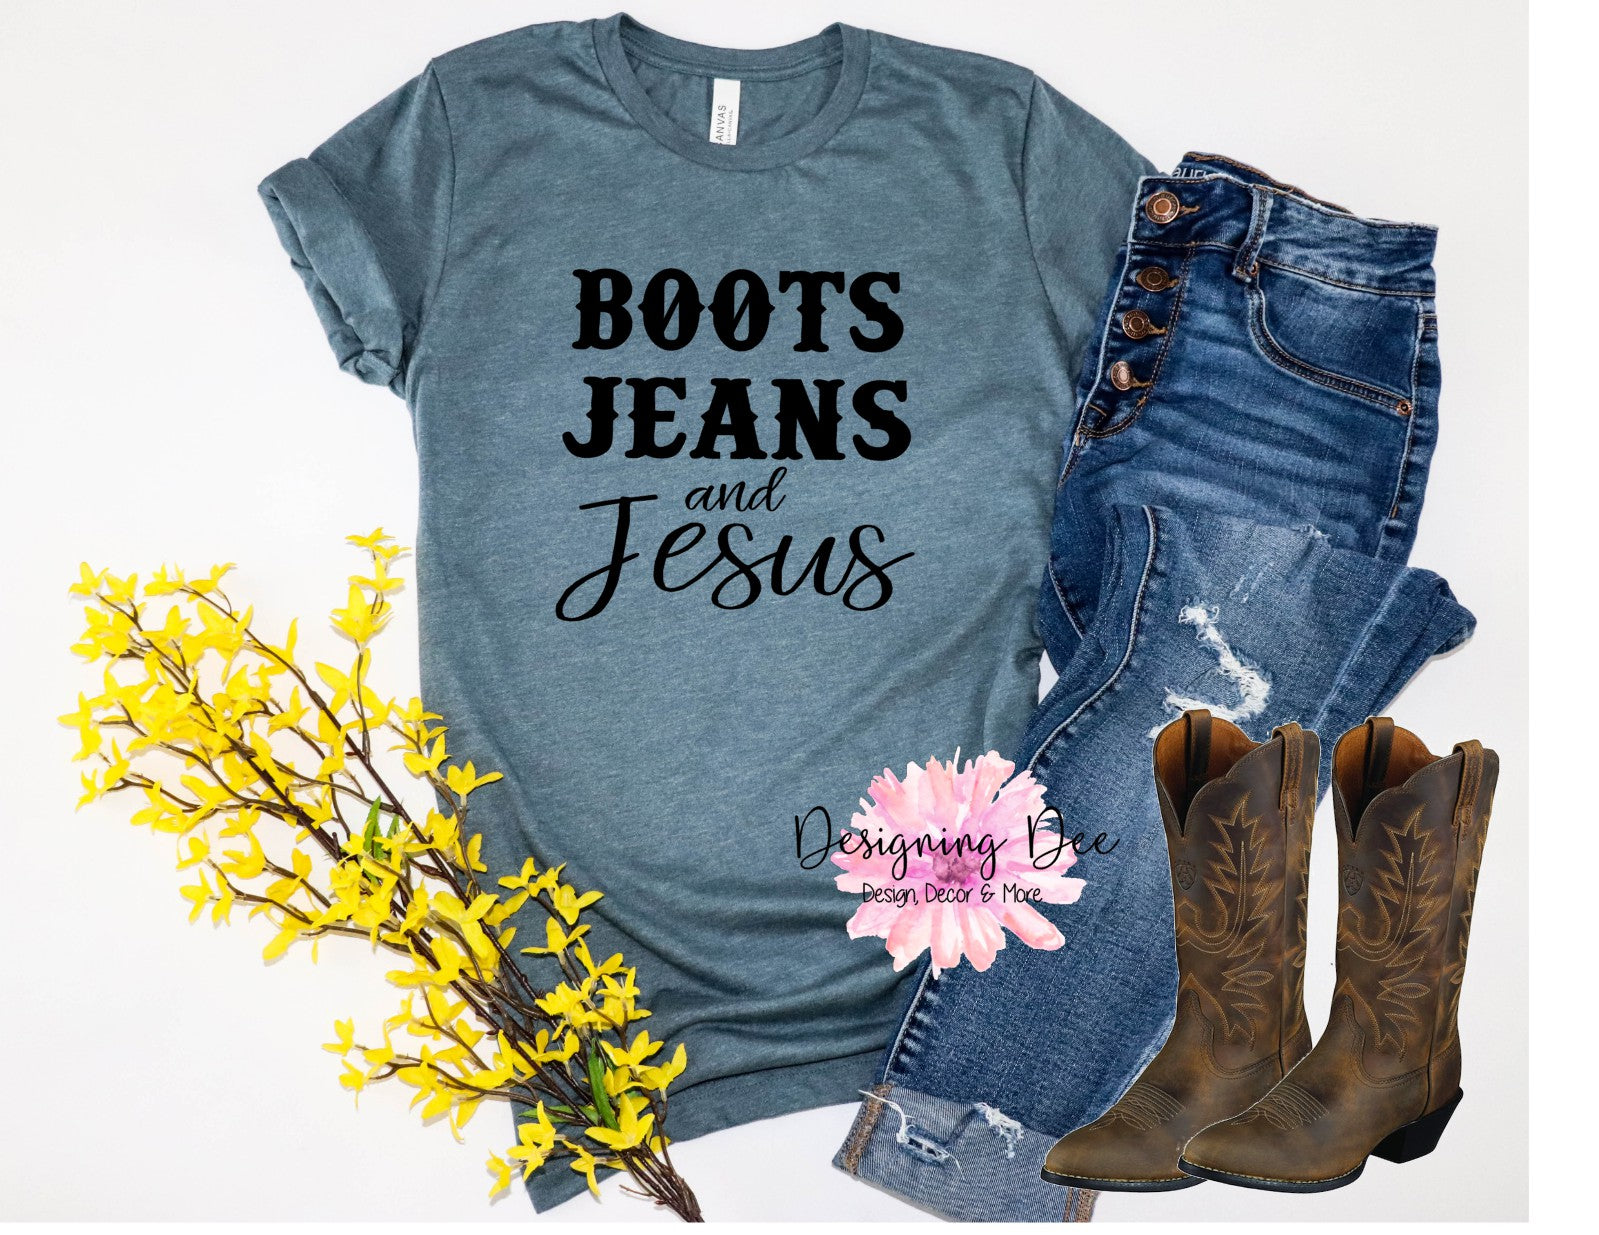 Boots jeans and Jesus